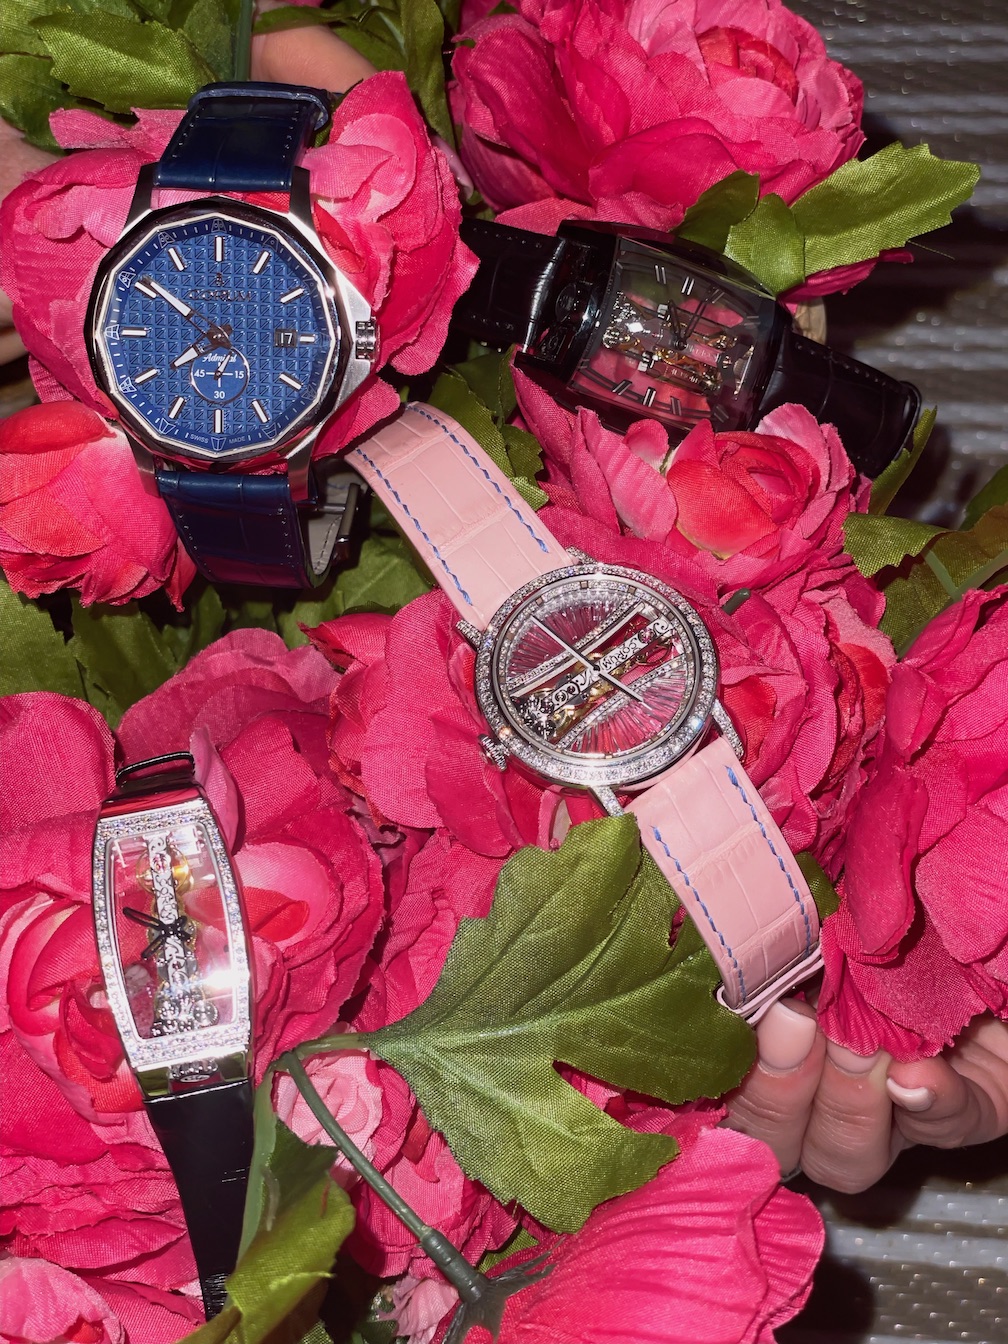 Corum watches on display at Seaglass Rose Experience 2022